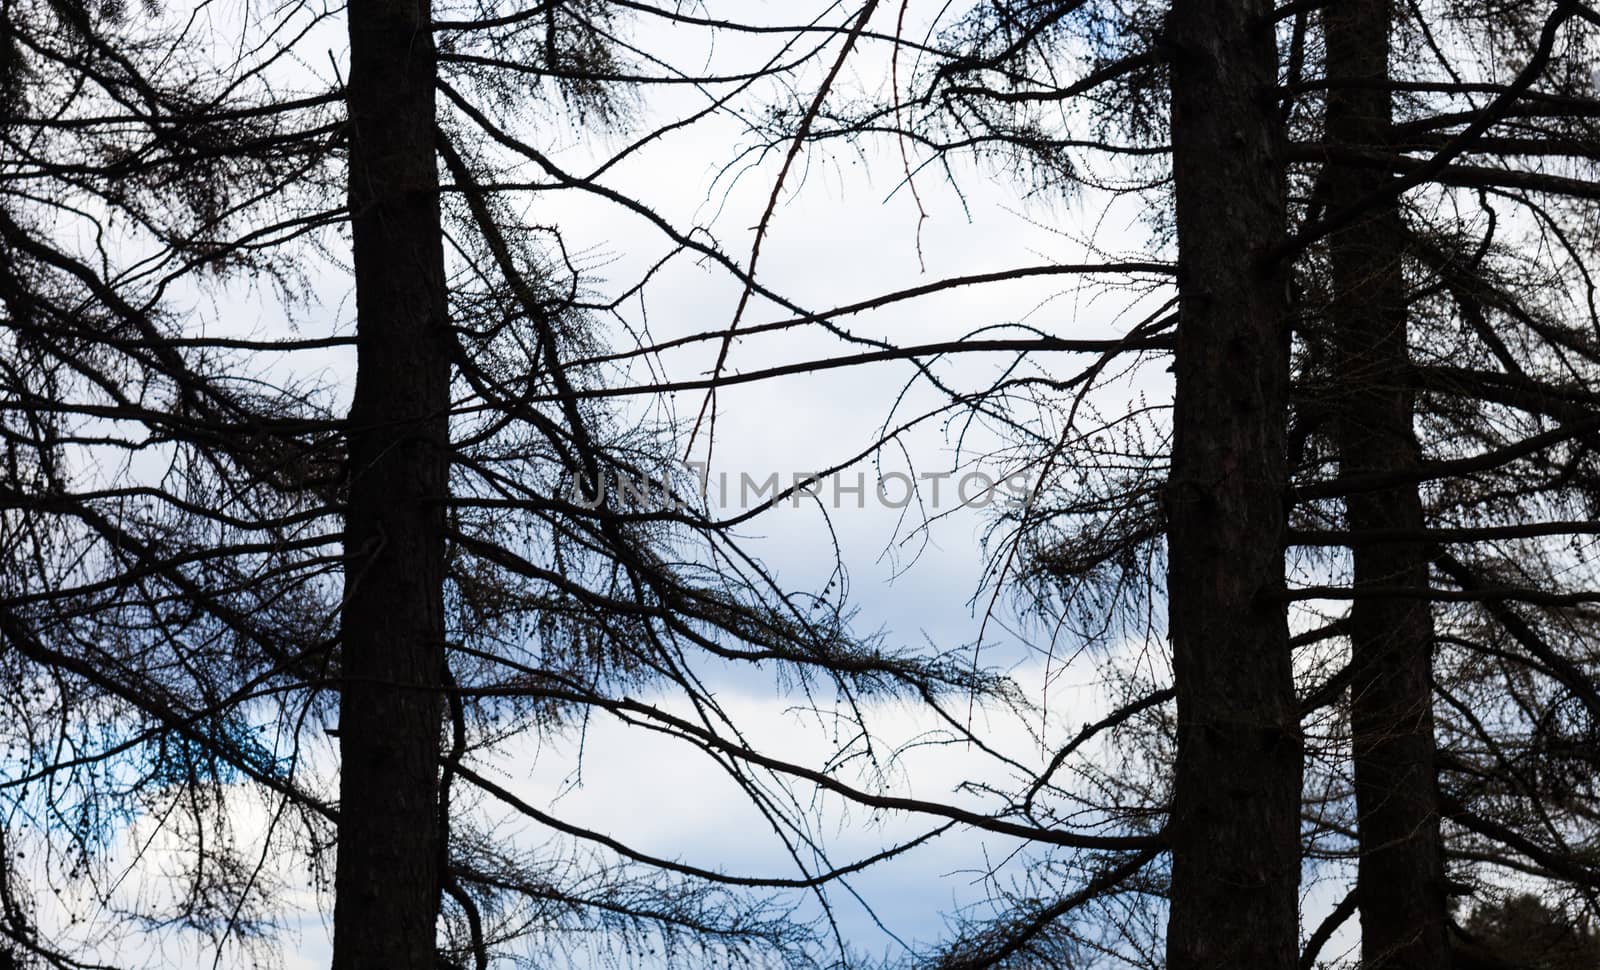 Silhouettes of three coniferous trees against cloudy sky